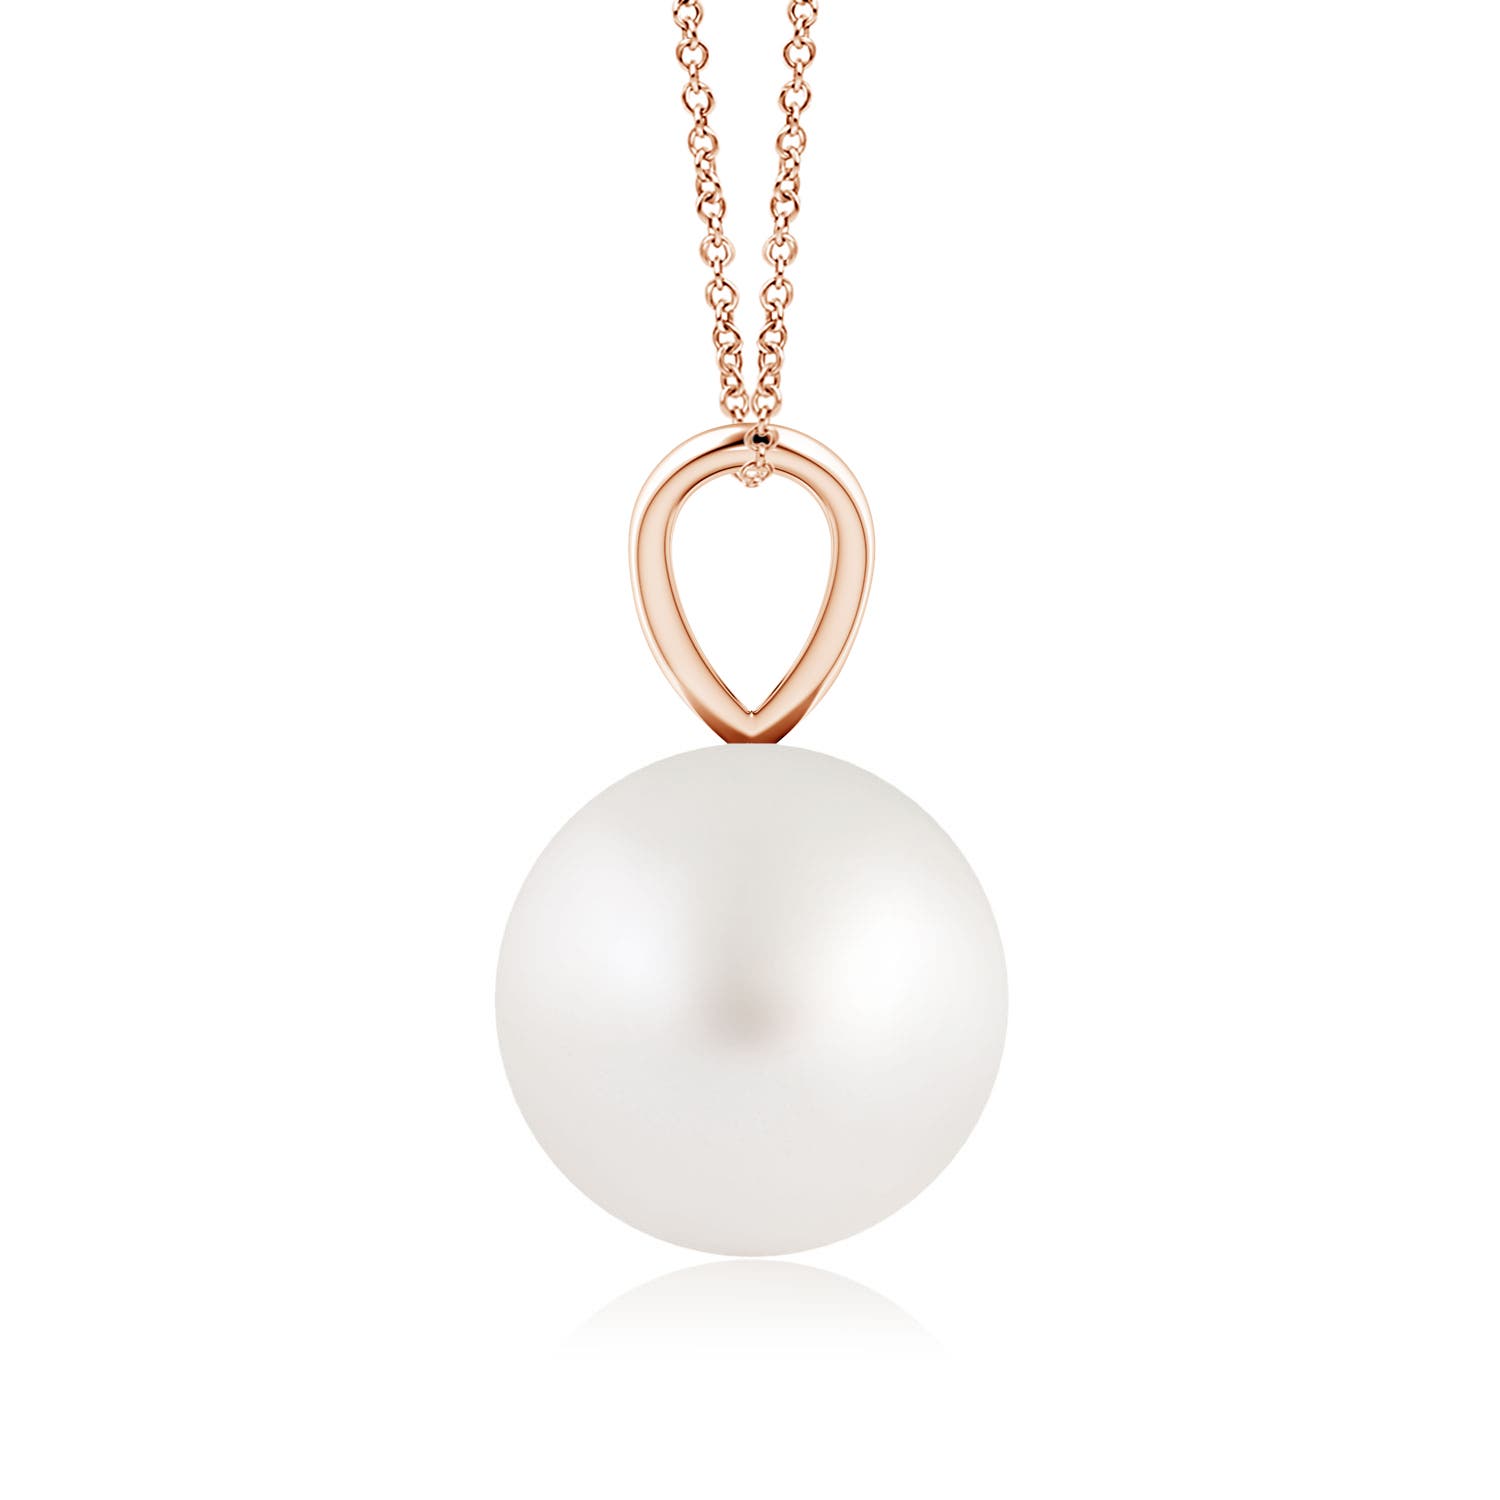 AA - South Sea Cultured Pearl / 5.25 CT / 14 KT Rose Gold